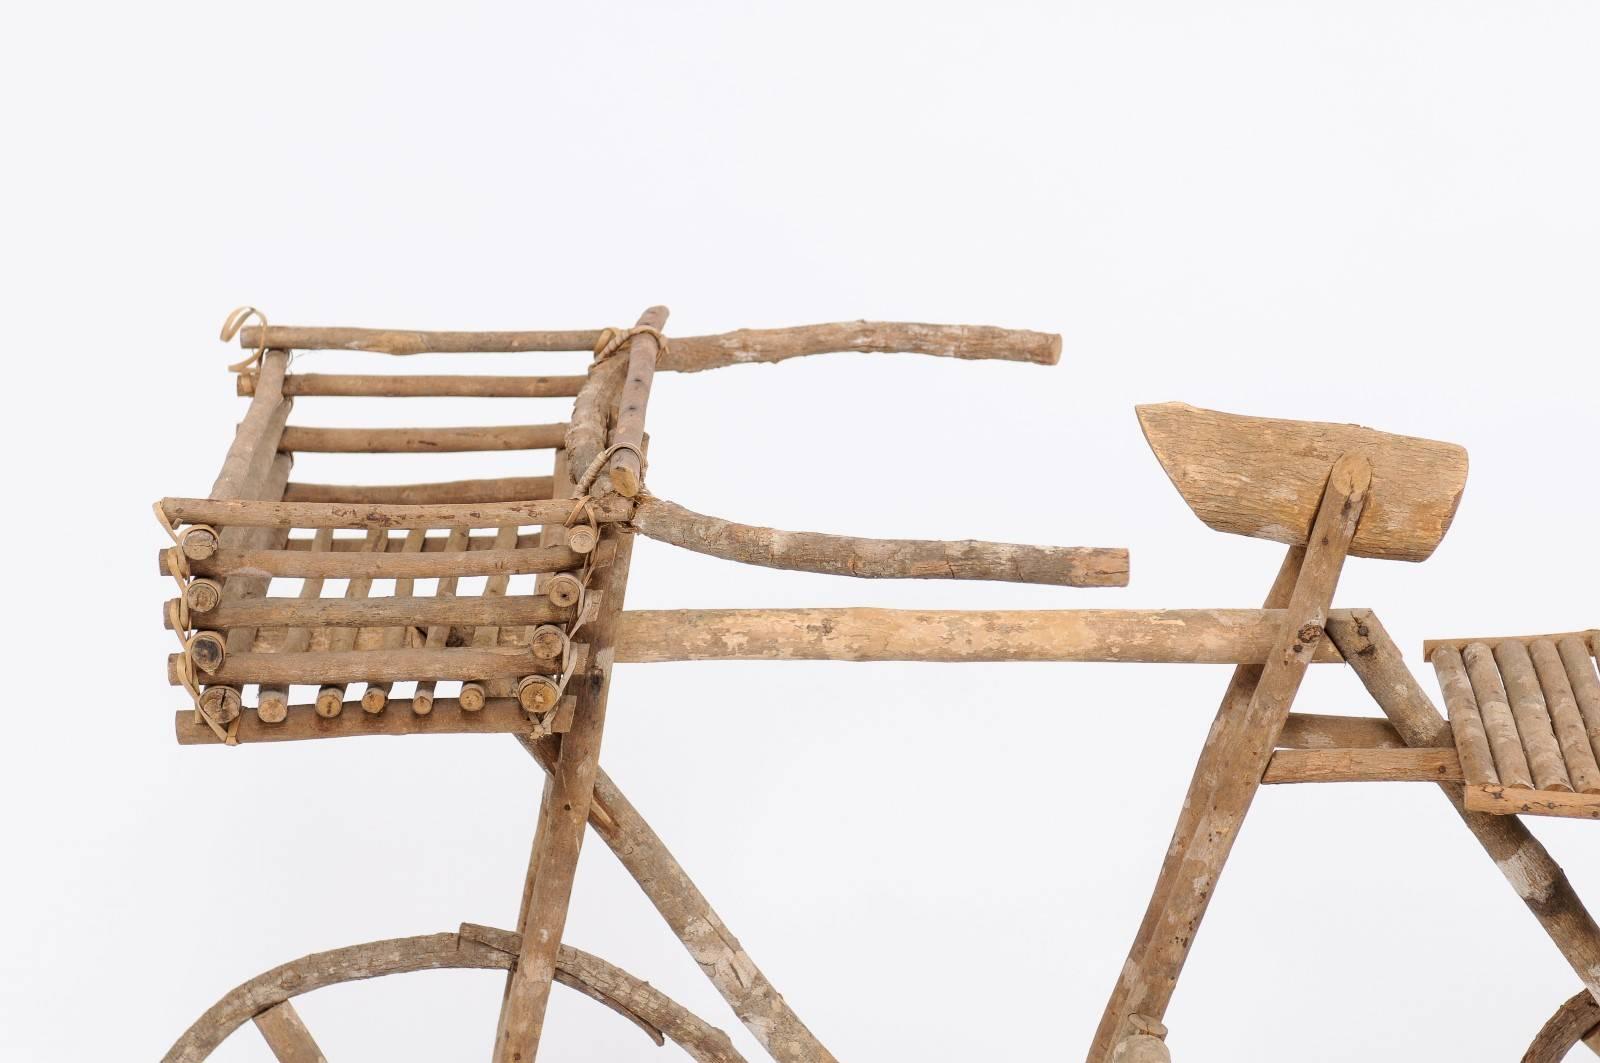 A rustic French wooden bicycle decorative accent from the 1970s, perfect to be used as a garden ornament or planter. This put a big smile on our faces the minute we spotted it at a fair in the south of France. What’s not to love? A sassy,